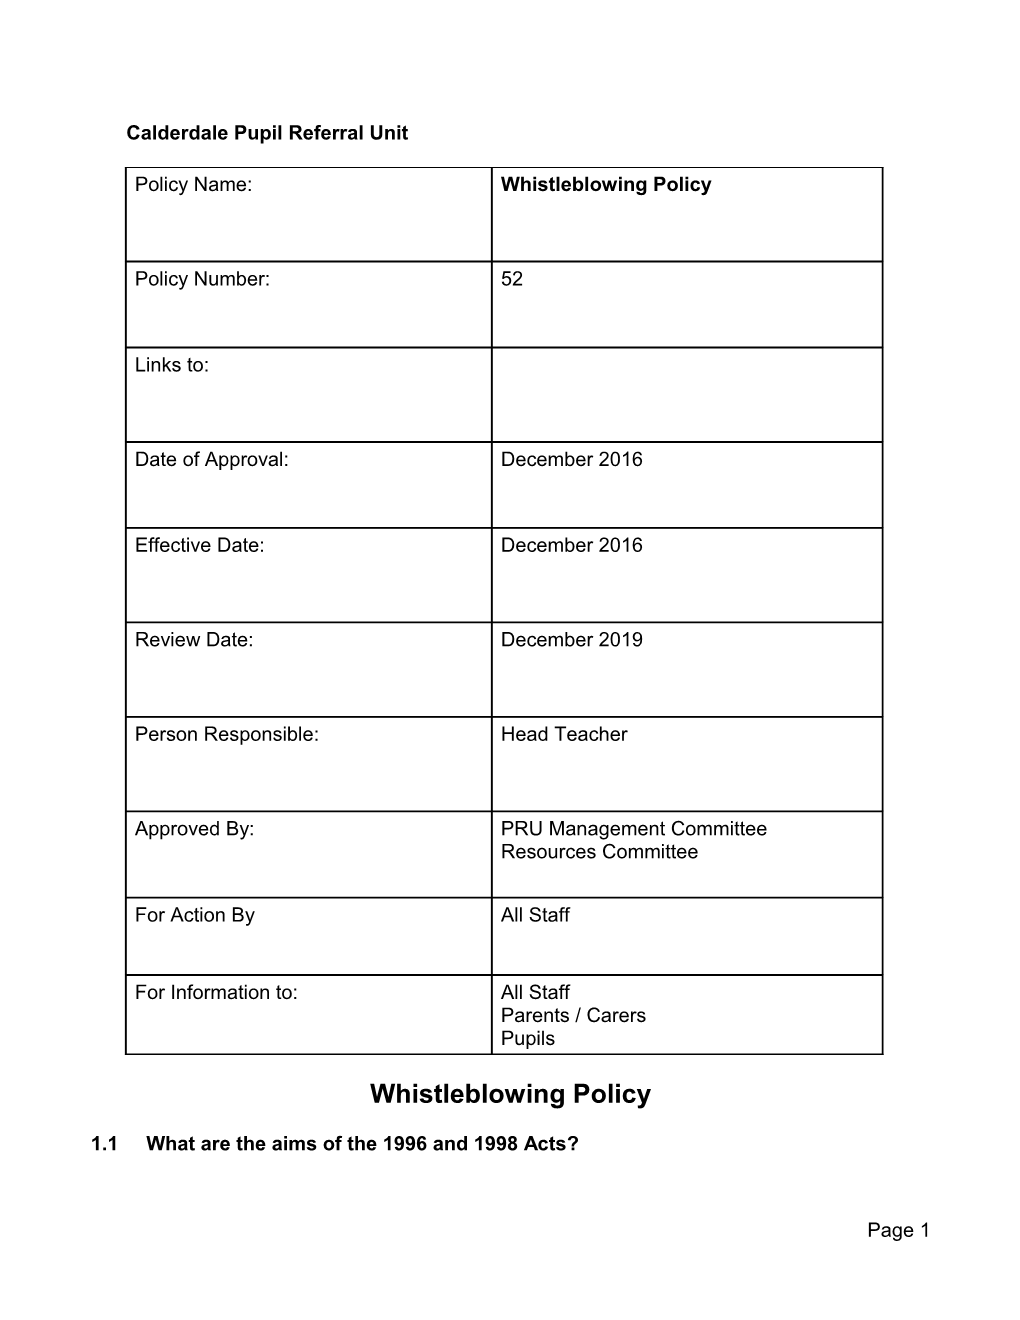 This Document Contains a Word Version of the Whistleblowing Policy for Your Schools Adoption